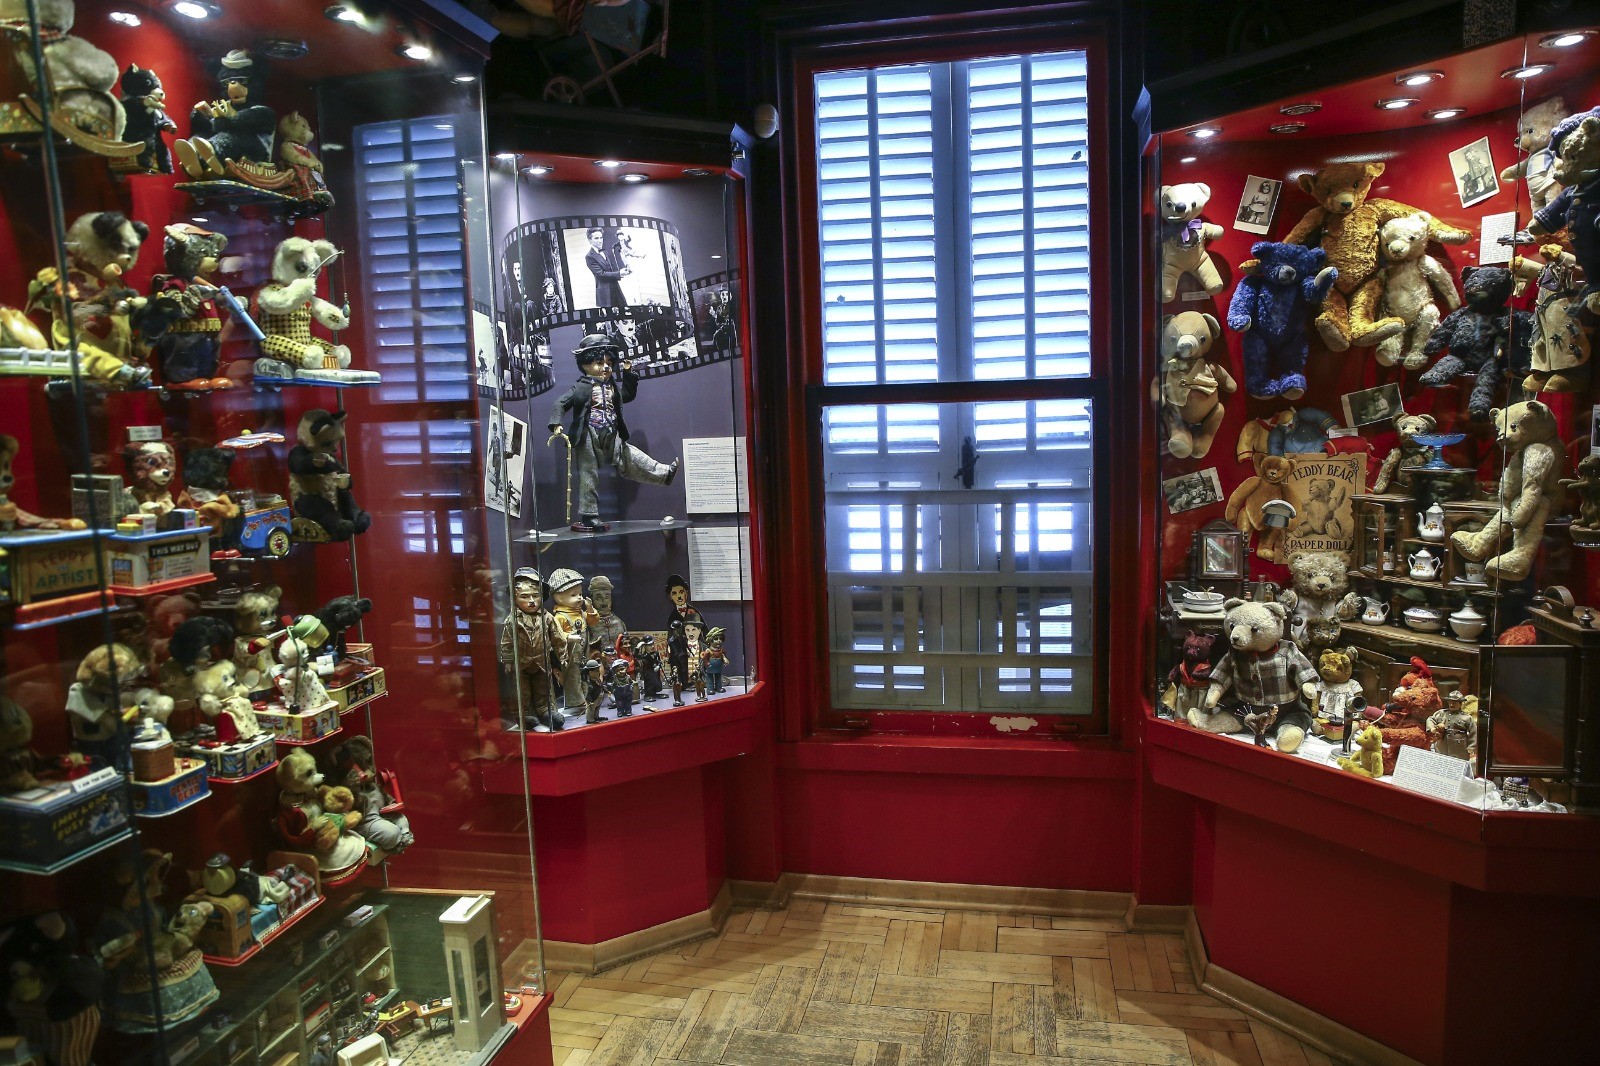 The Toy Museum: A Whimsical Wonderland in the Heart of Istanbul